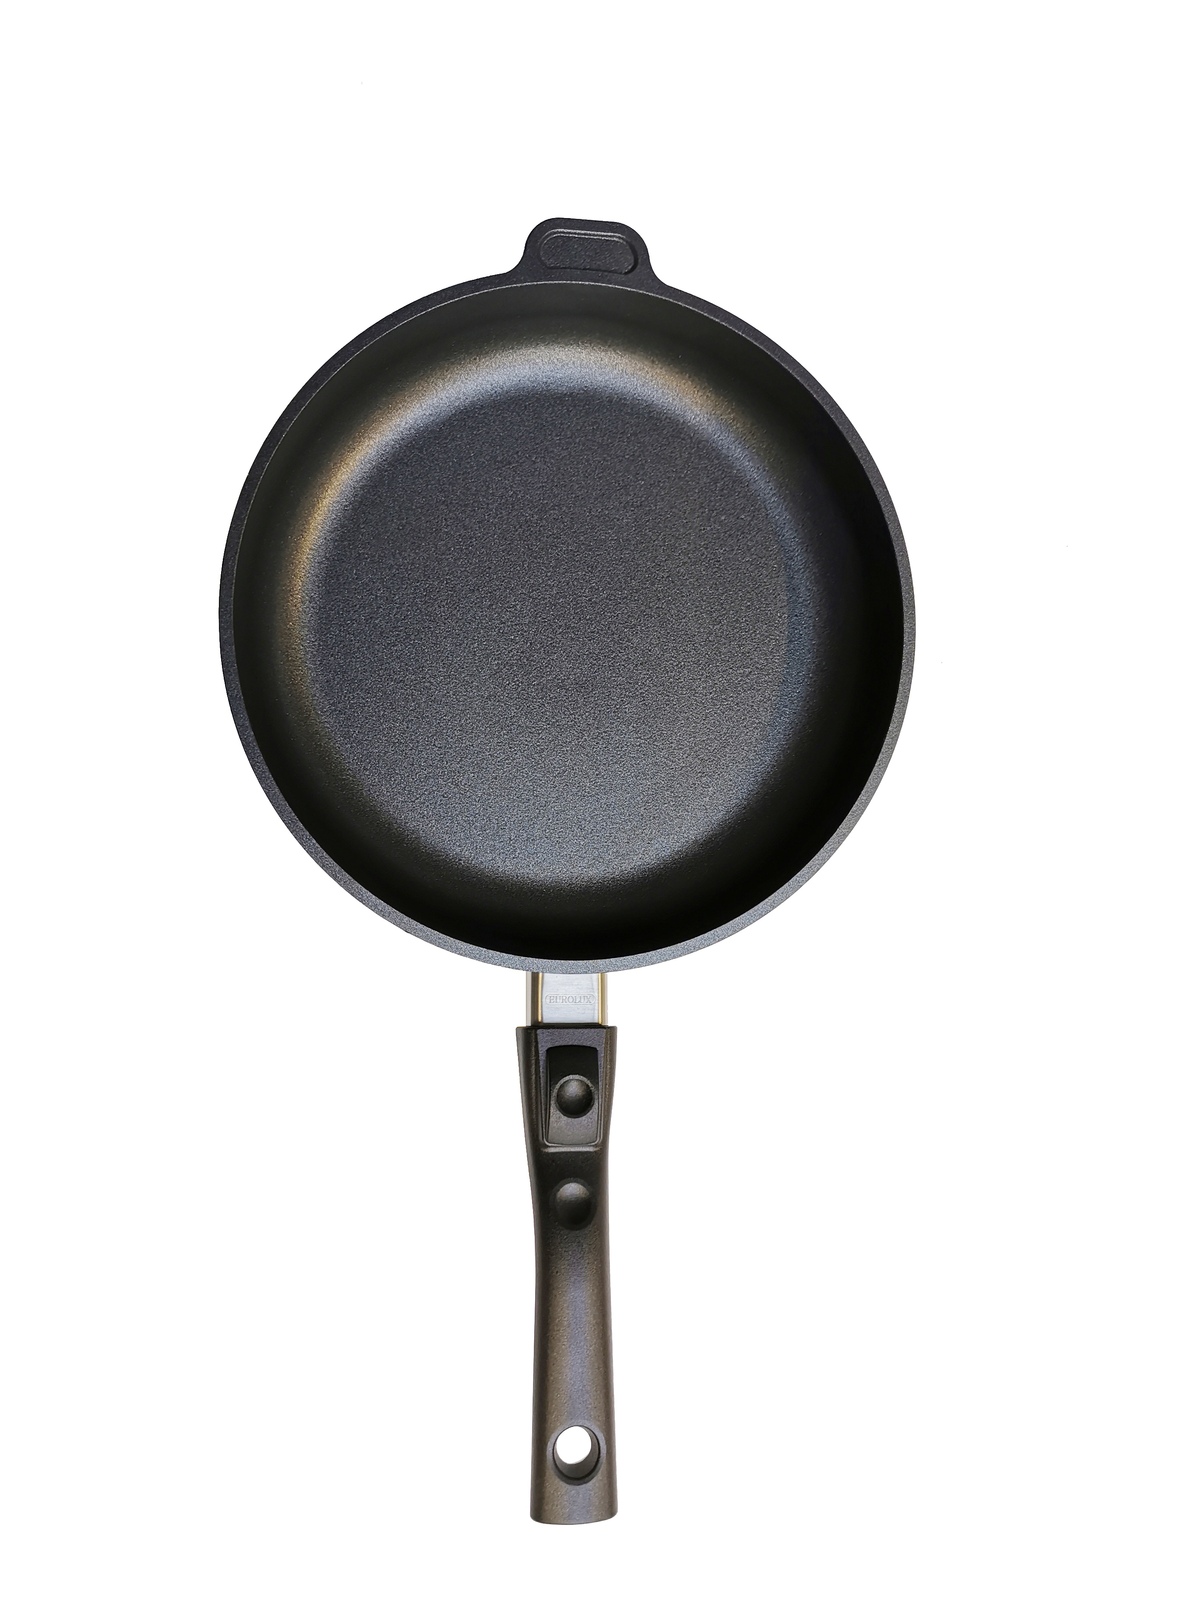 Frying pan induction 32cm x 5cm with detachable handle & oven-proof glass lid